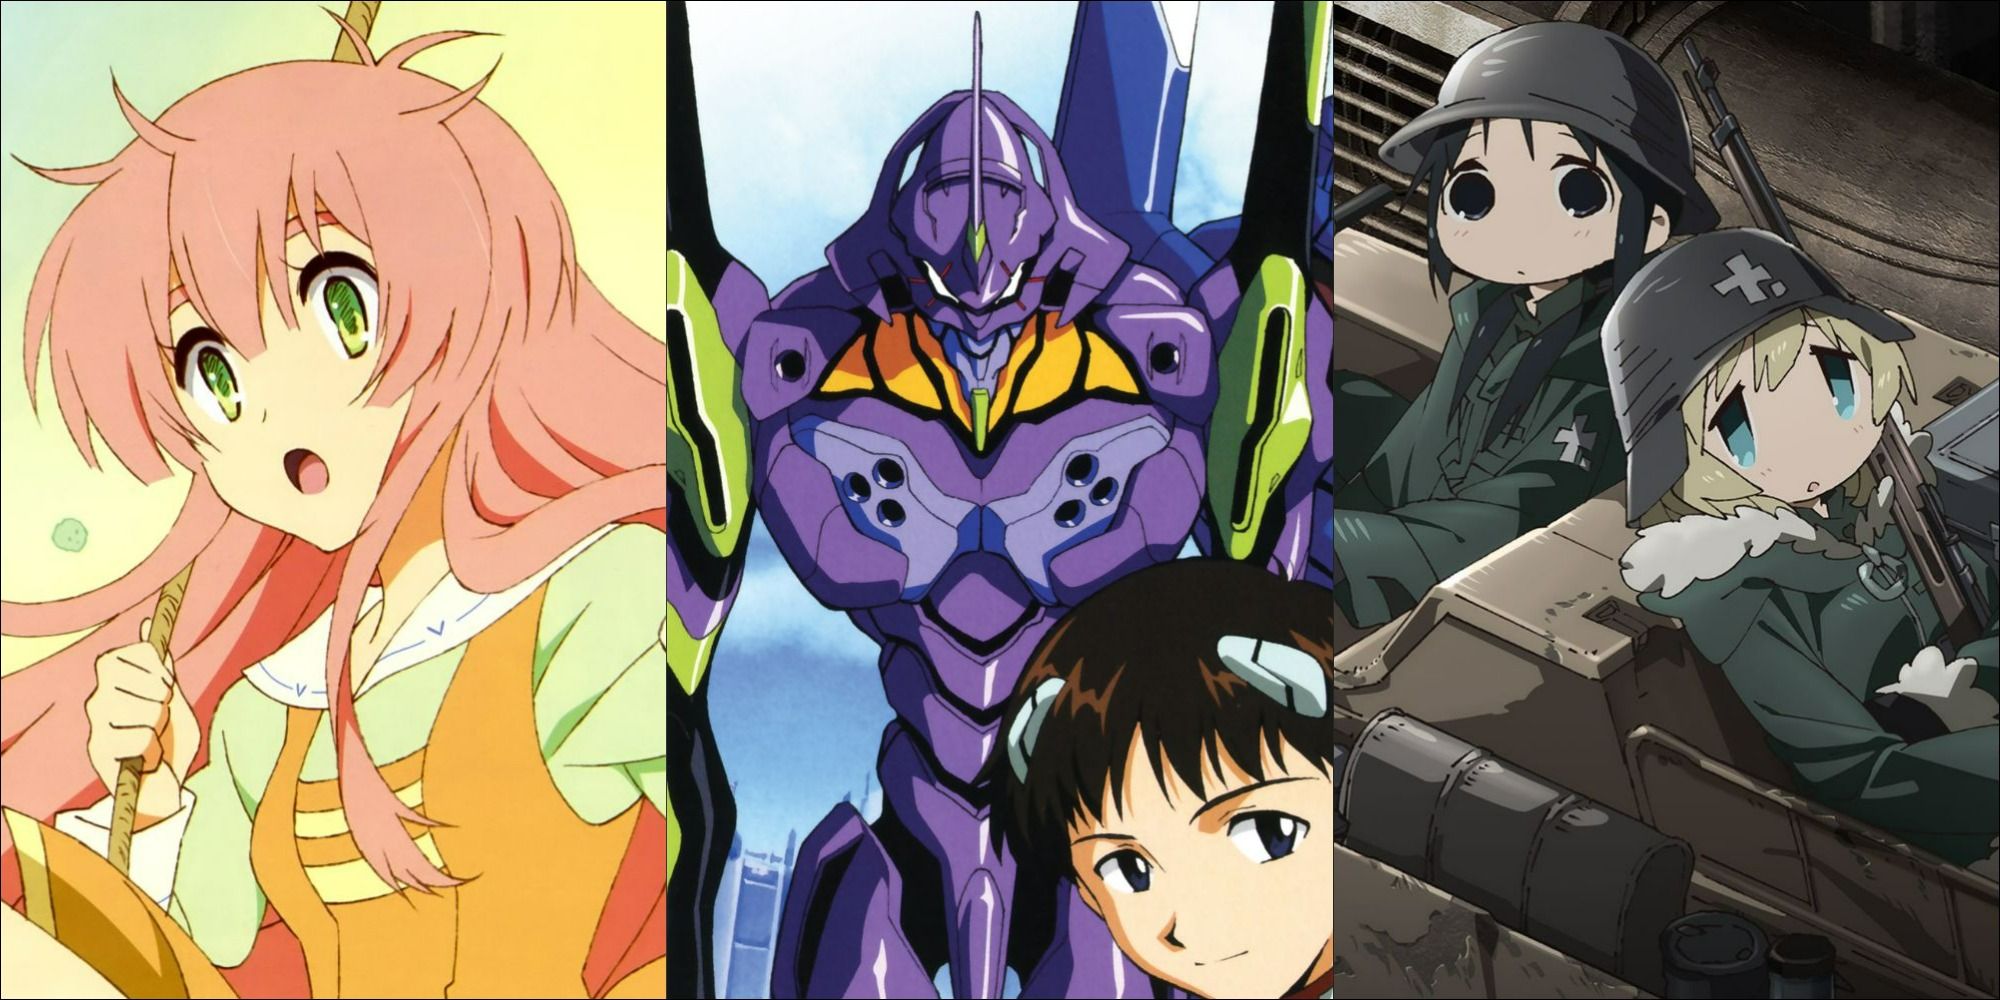 10 Post-Apocalyptic Anime Everyone Should Watch